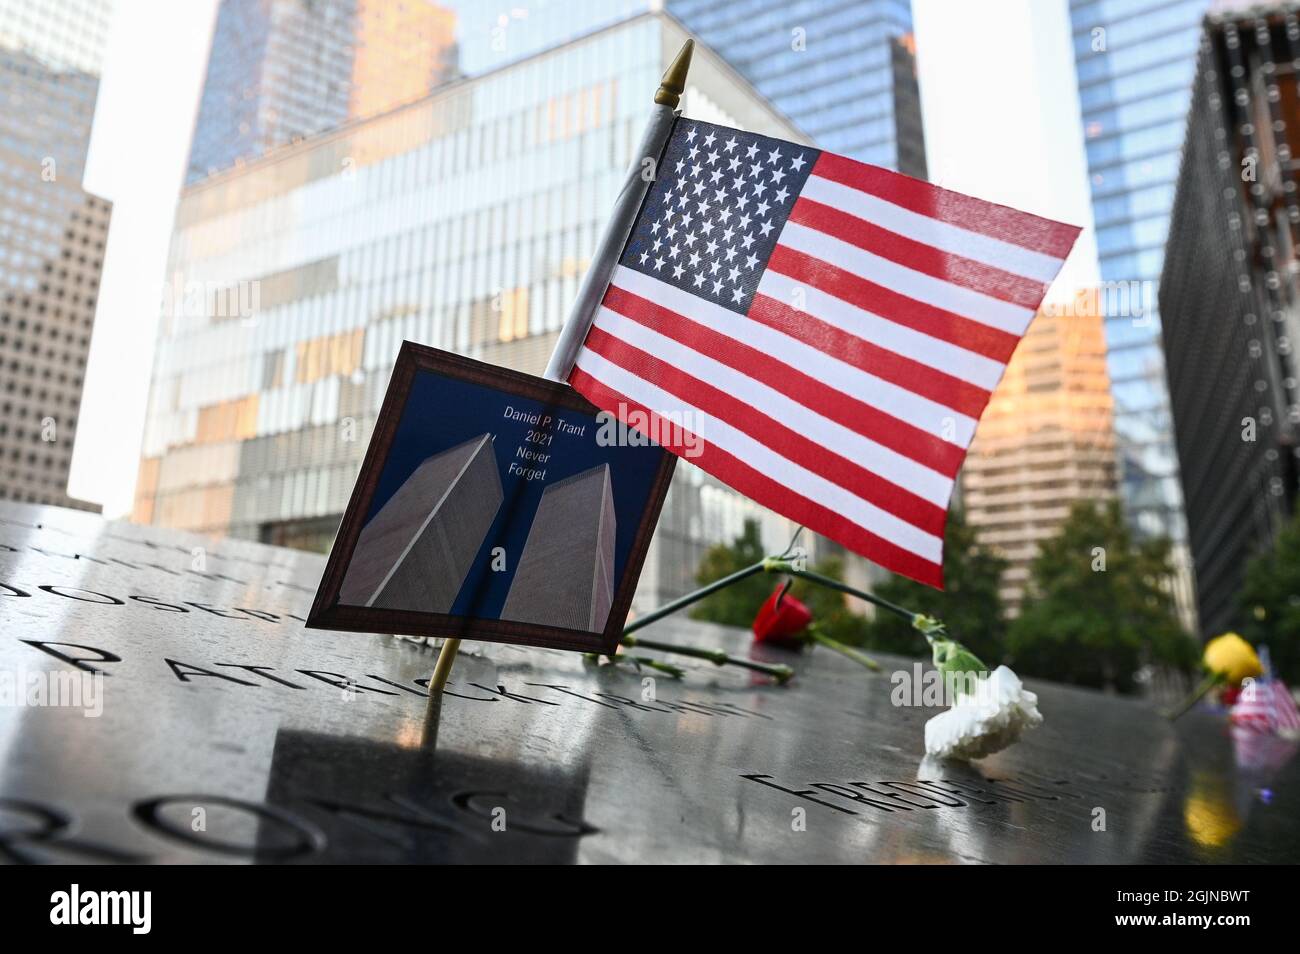 New York, USA. 11th Sep, 2021. An American flag placed along with a photo of the Twin Towers and the name Daniel P. Trant, a Cantor Fitzgerald bond trader that died during 9/11, at a ceremony at Ground Zero held in commemoration of the 20th anniversary of the terrorist attacks on the World Trade Center, the Pentagon and the crash of United Airlines Flight 93 in Shanksville, PA, held in lower Manhattan, New York City, NY, on Sept. 11, 2021. Pool photo by Anthony Behar/UPI Credit: UPI/Alamy Live News Stock Photo